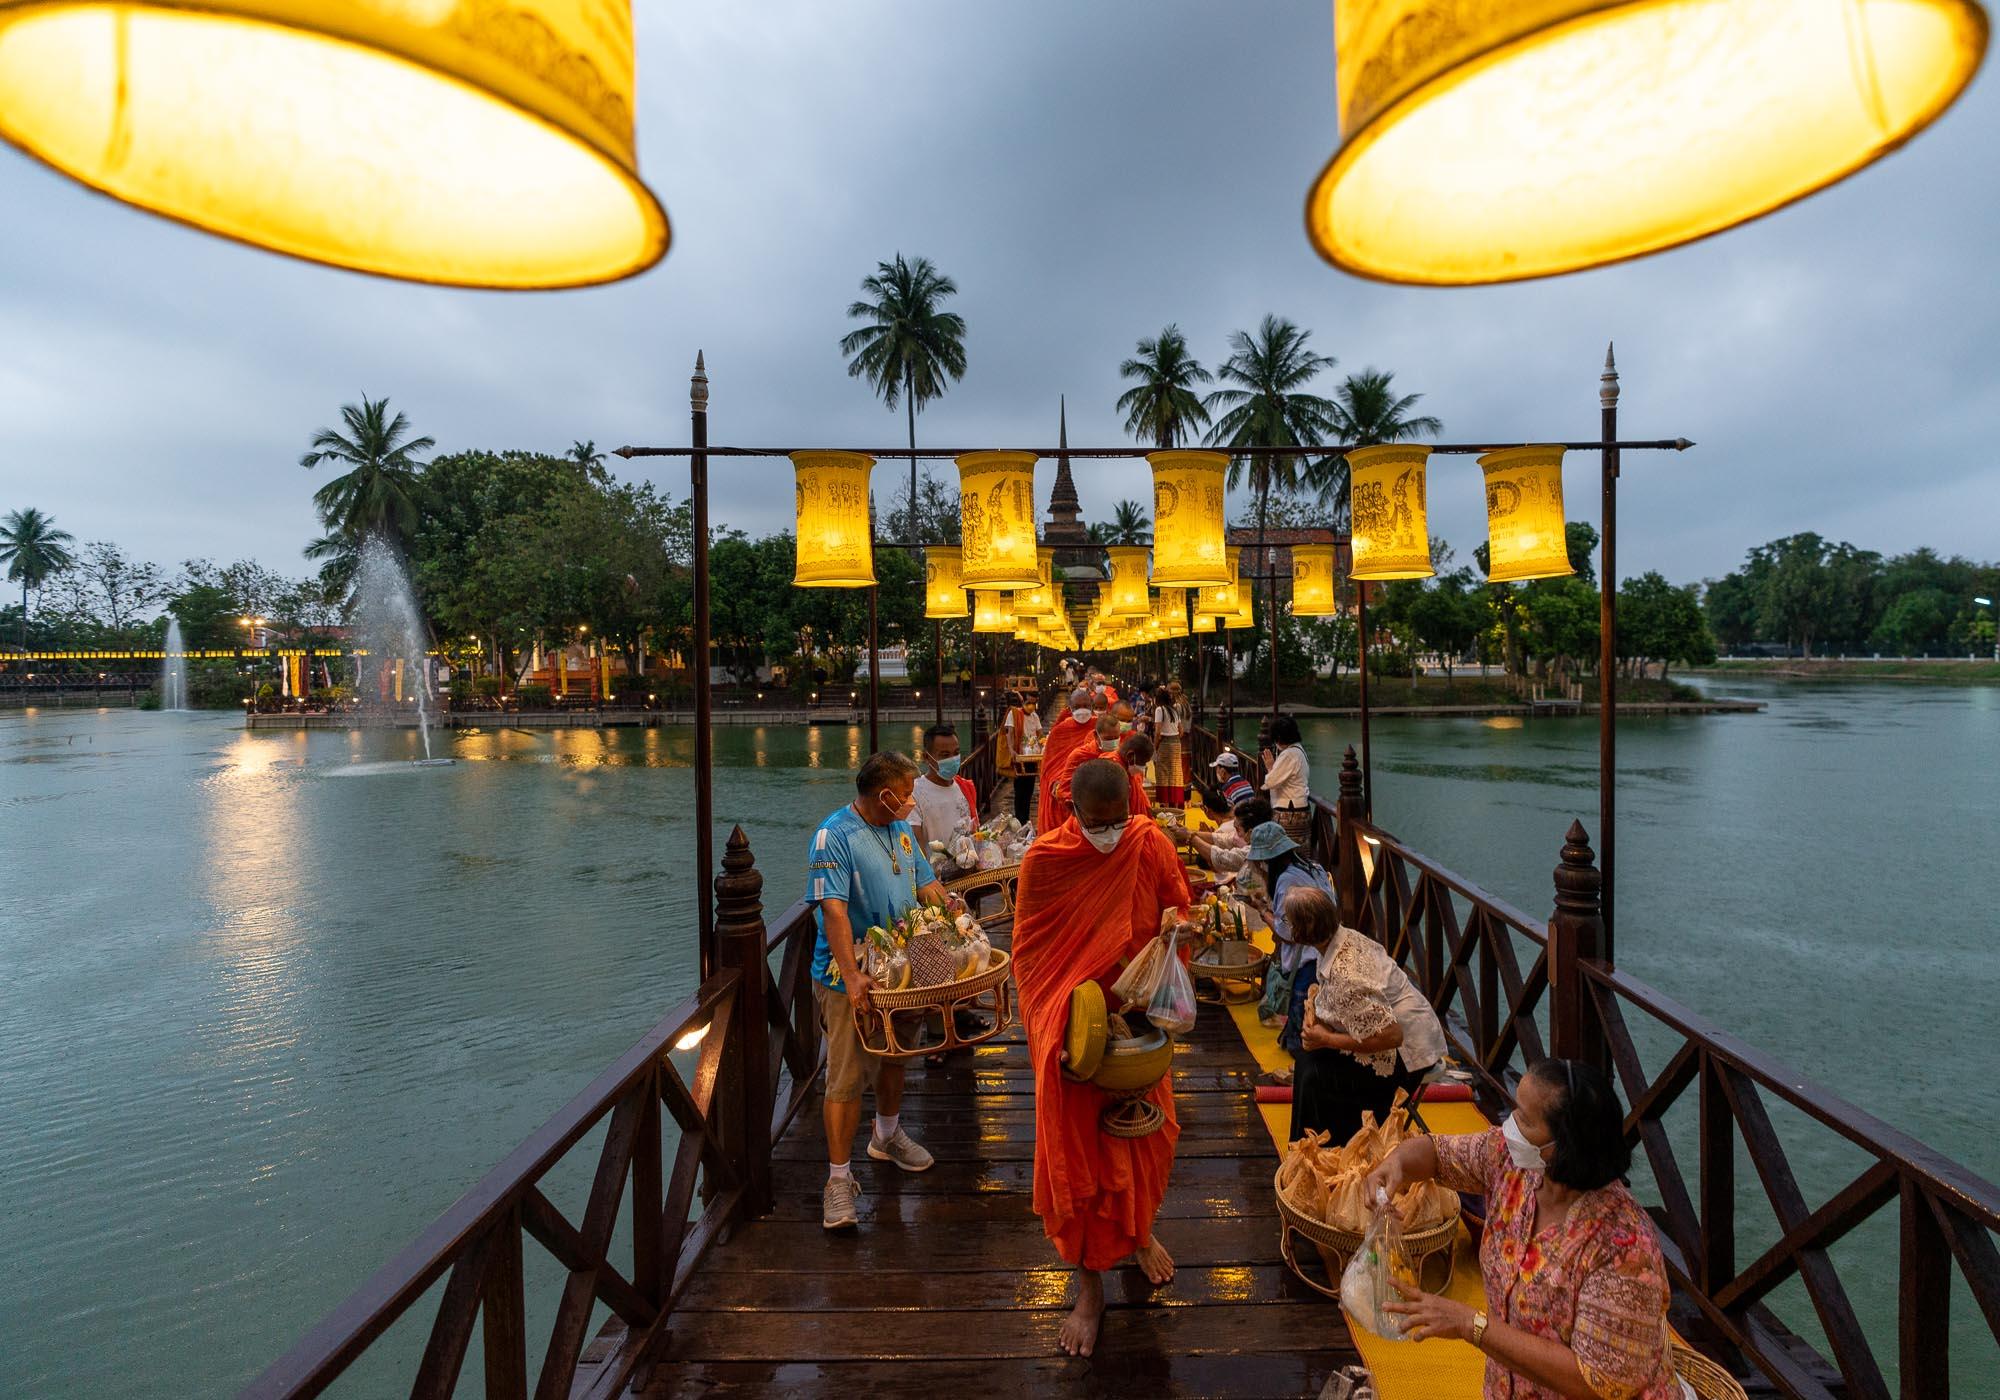 Lanterns light the bridge as the monks walk out from the temple to receive the offerings from worshippers. – © Michael Turtle